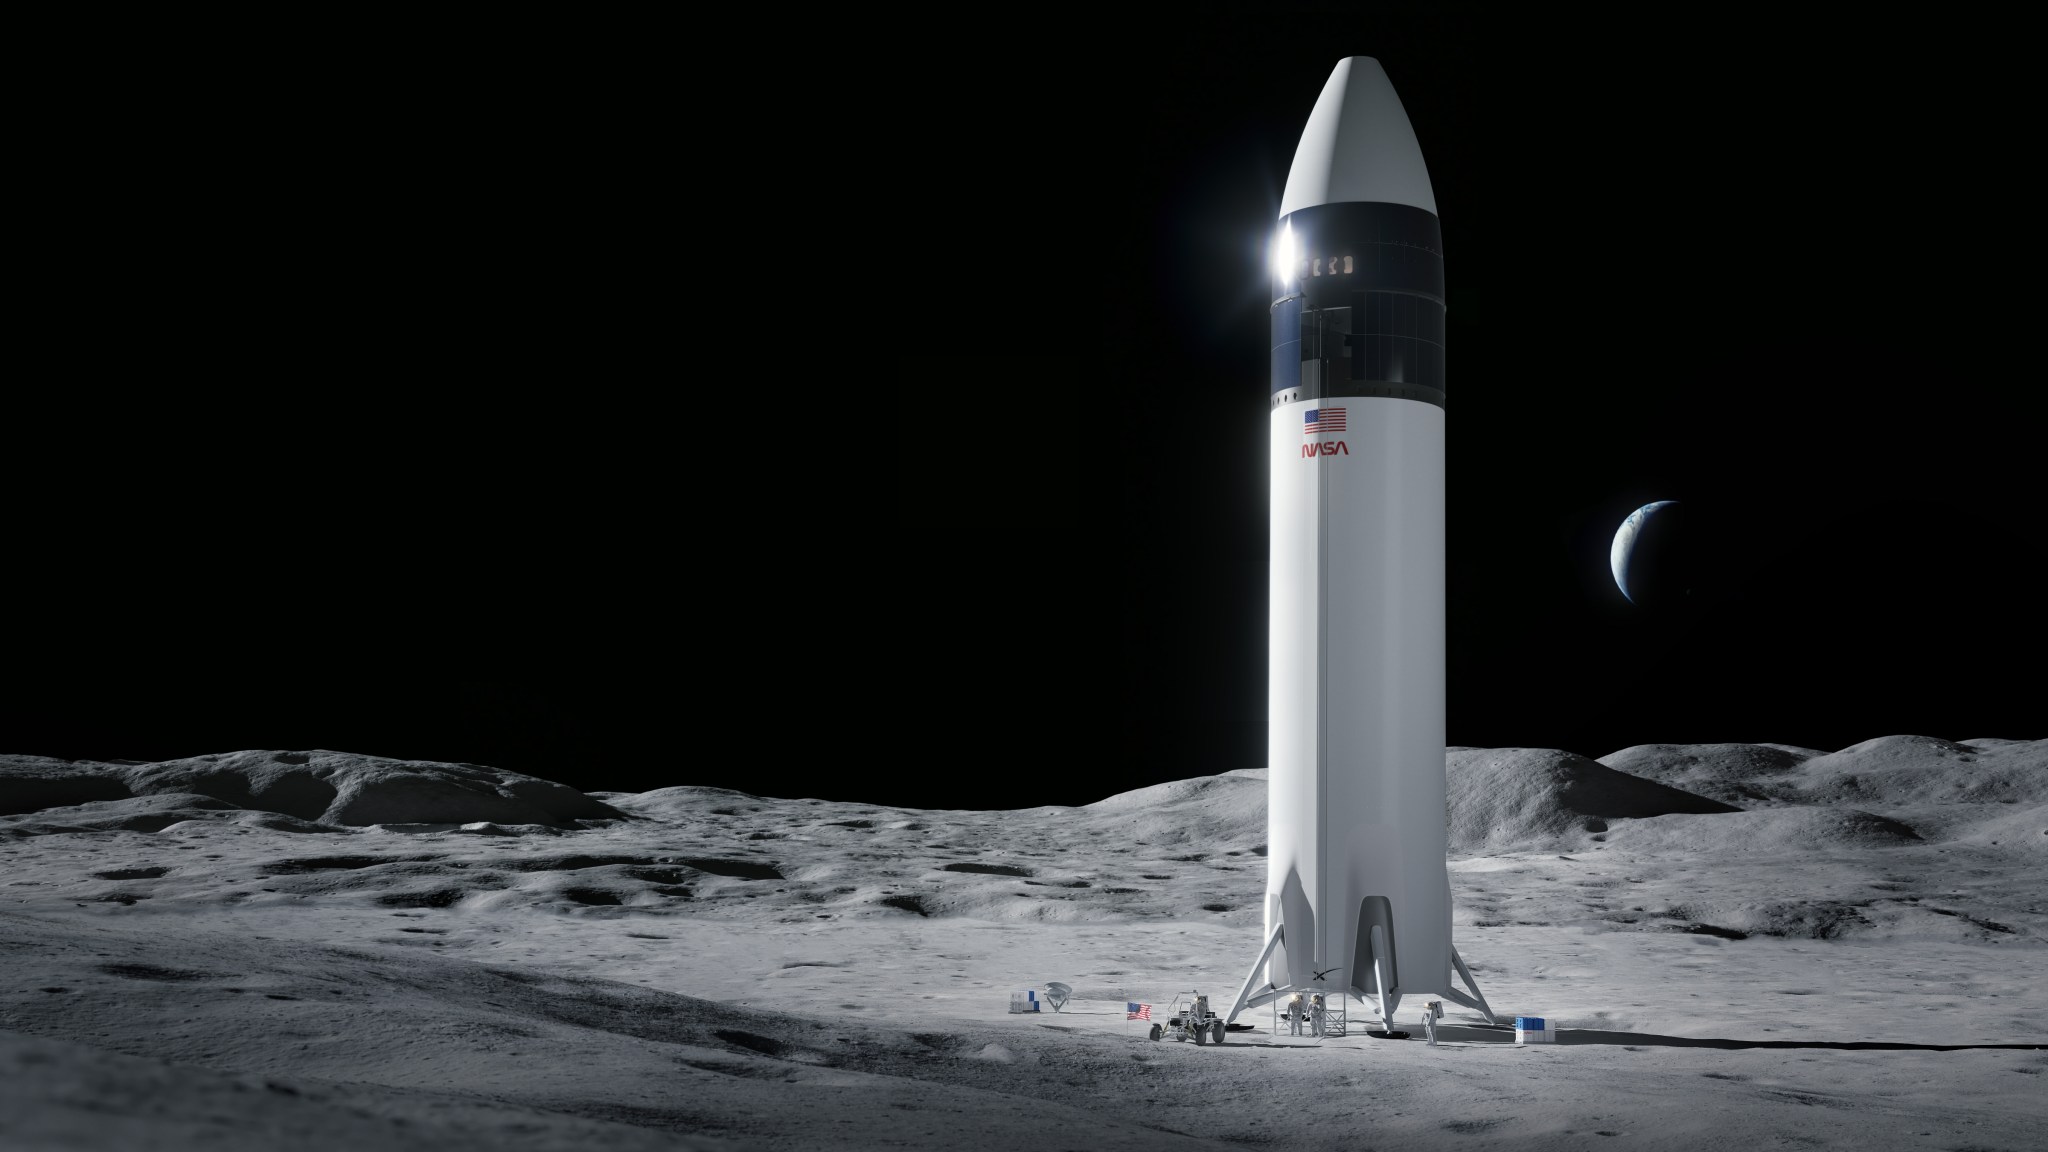 Illustration of SpaceX Starship human lander design that will carry the first NASA astronauts to the surface of the Moon under Artemis.